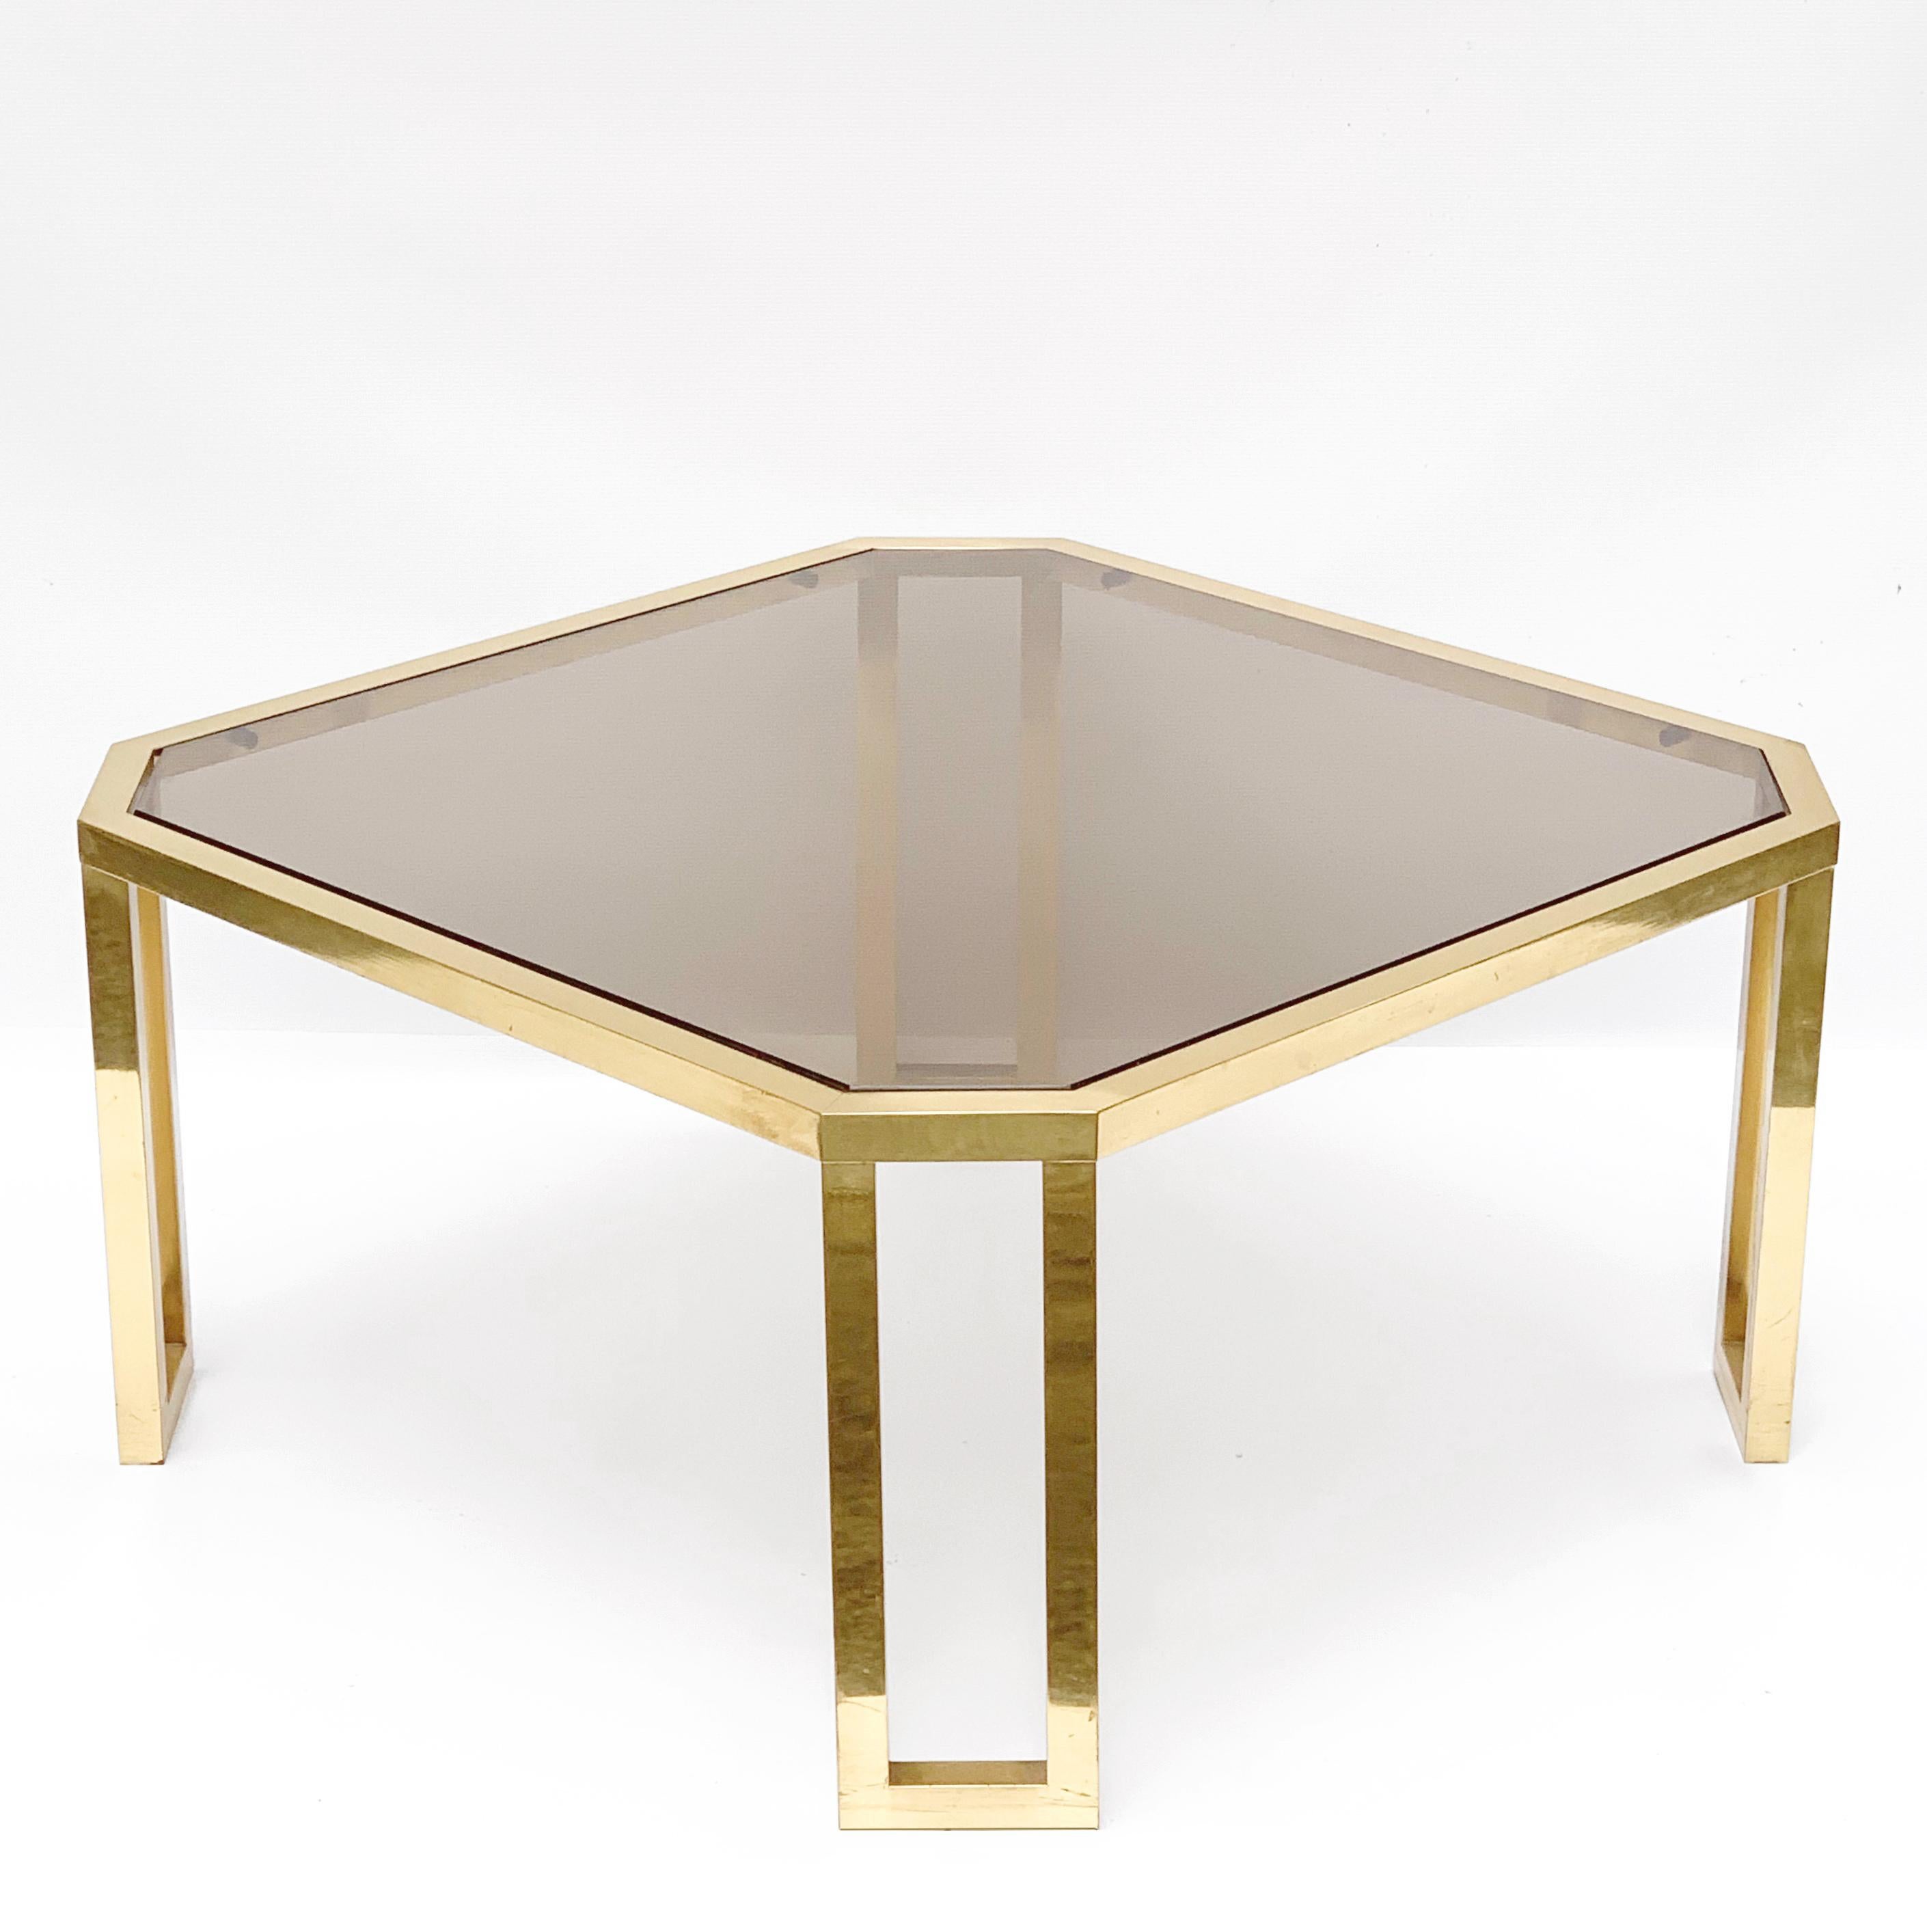 Maison Jansen Octagonal Tables in Brass and Glass, France, 1970s Coffee Tables For Sale 5